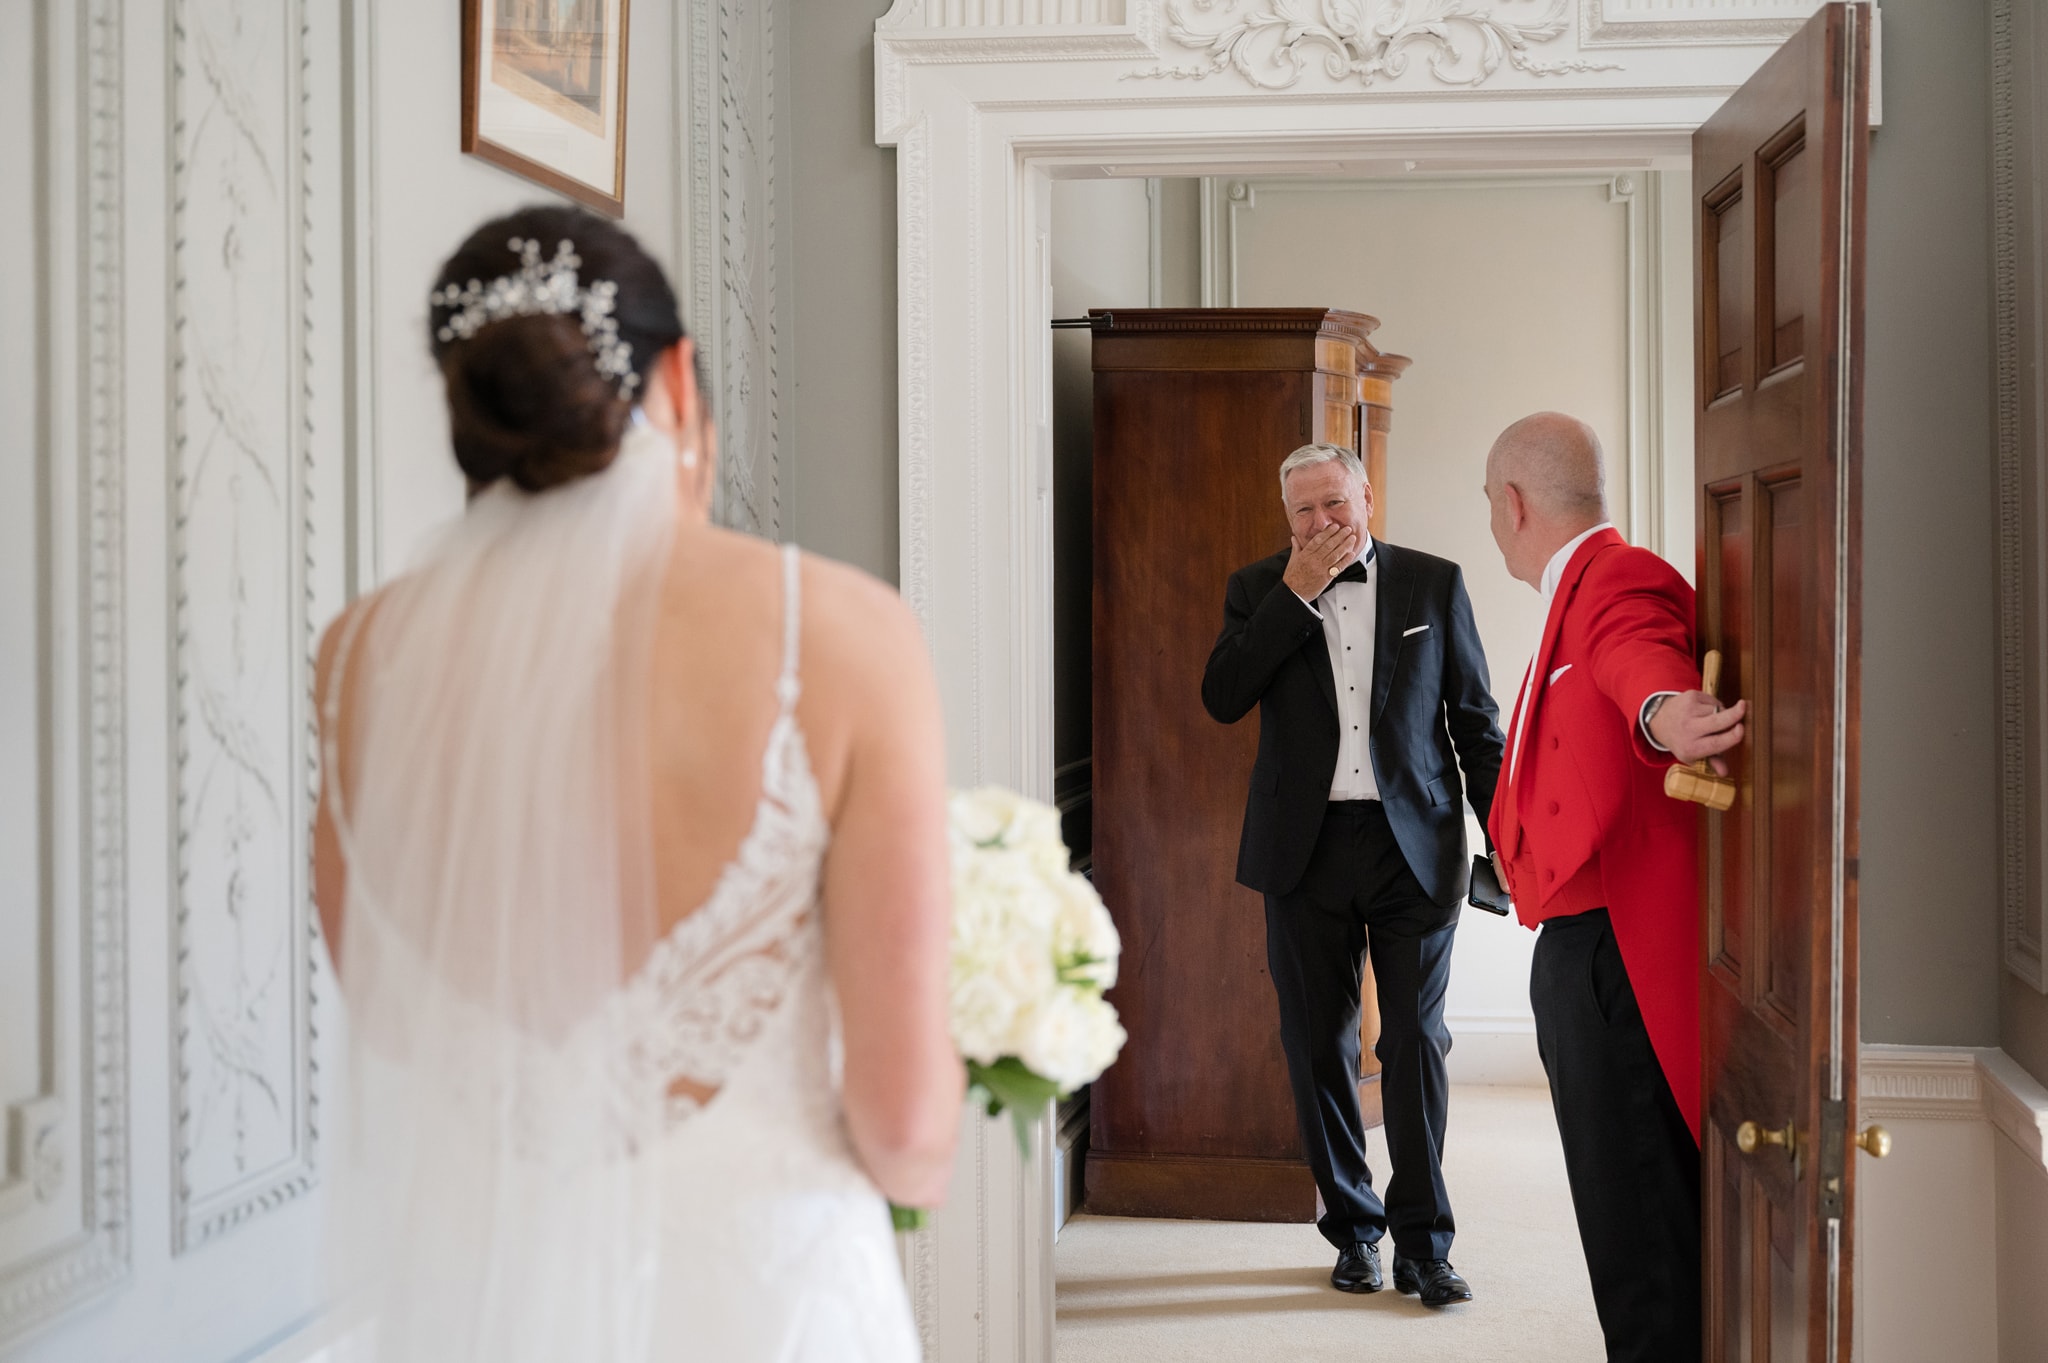 Bride's Dad holding his hand to his mouth in disbelief as he sees bride in her wedding dress for first time